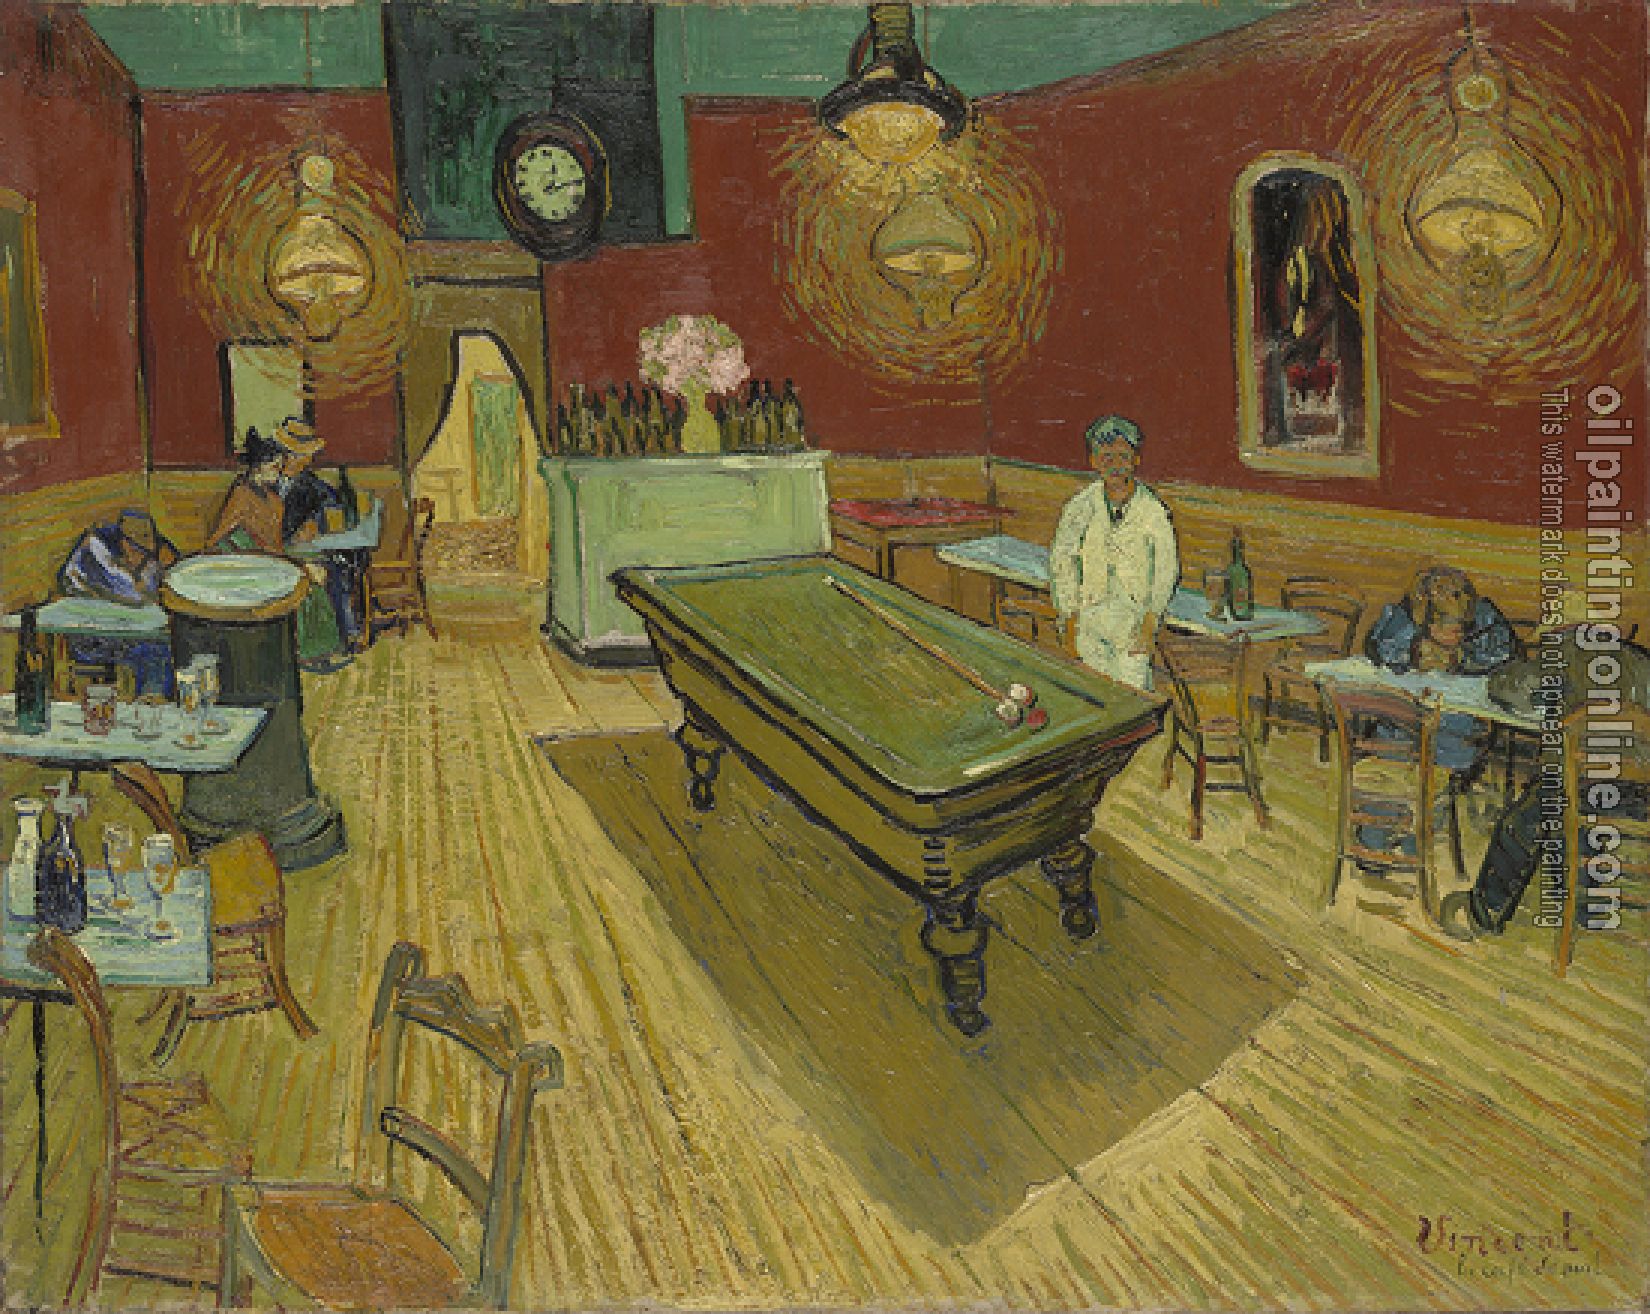 Gogh, Vincent van - The Night Cafe